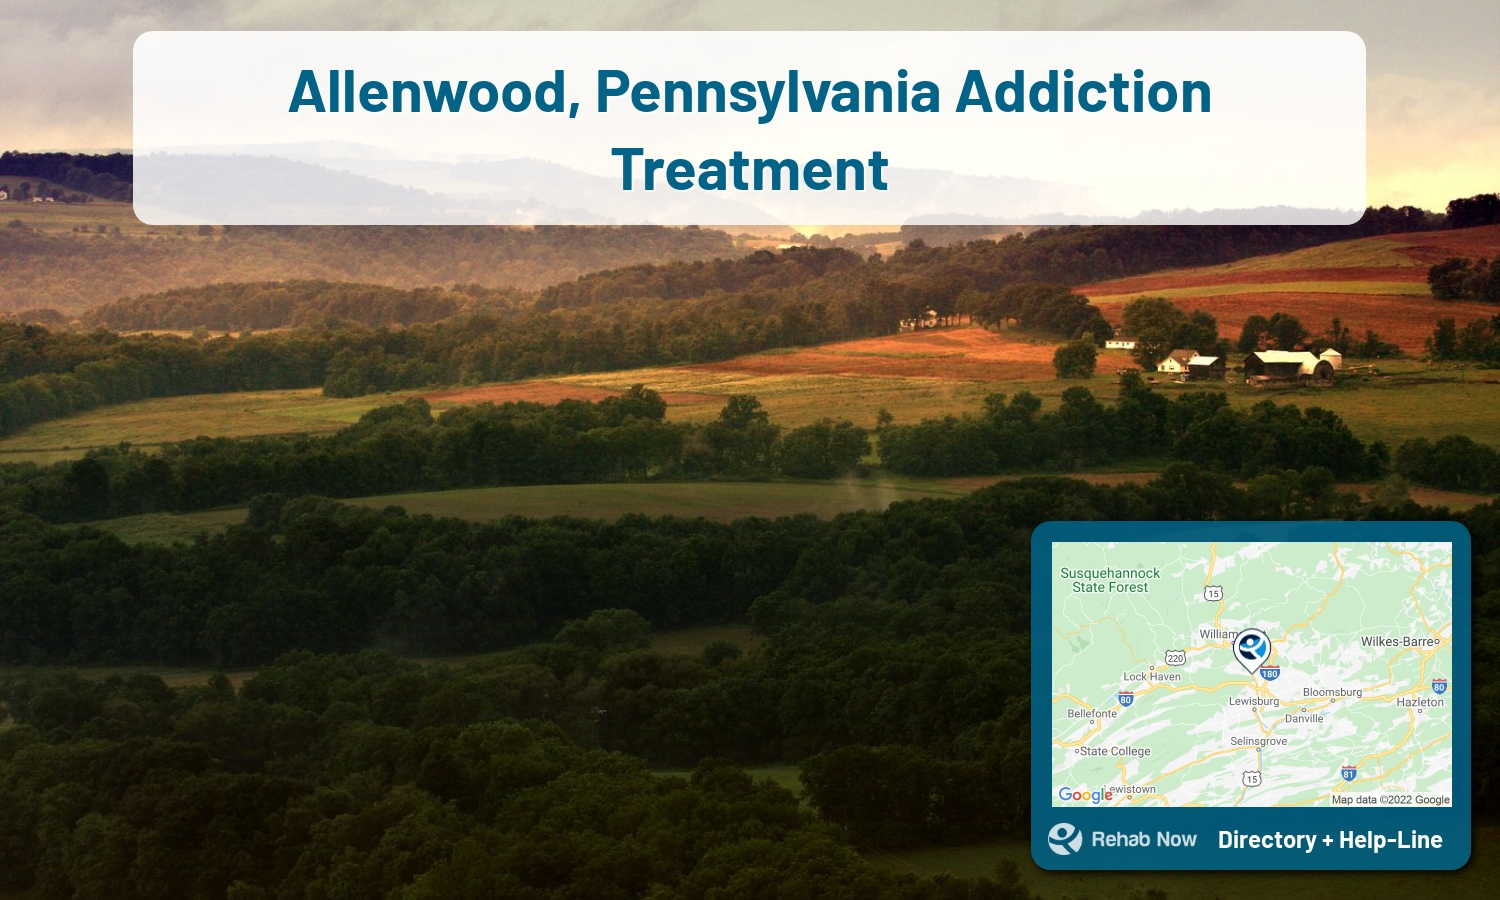 Allenwood, PA Treatment Centers. Find drug rehab in Allenwood, Pennsylvania, or detox and treatment programs. Get the right help now!